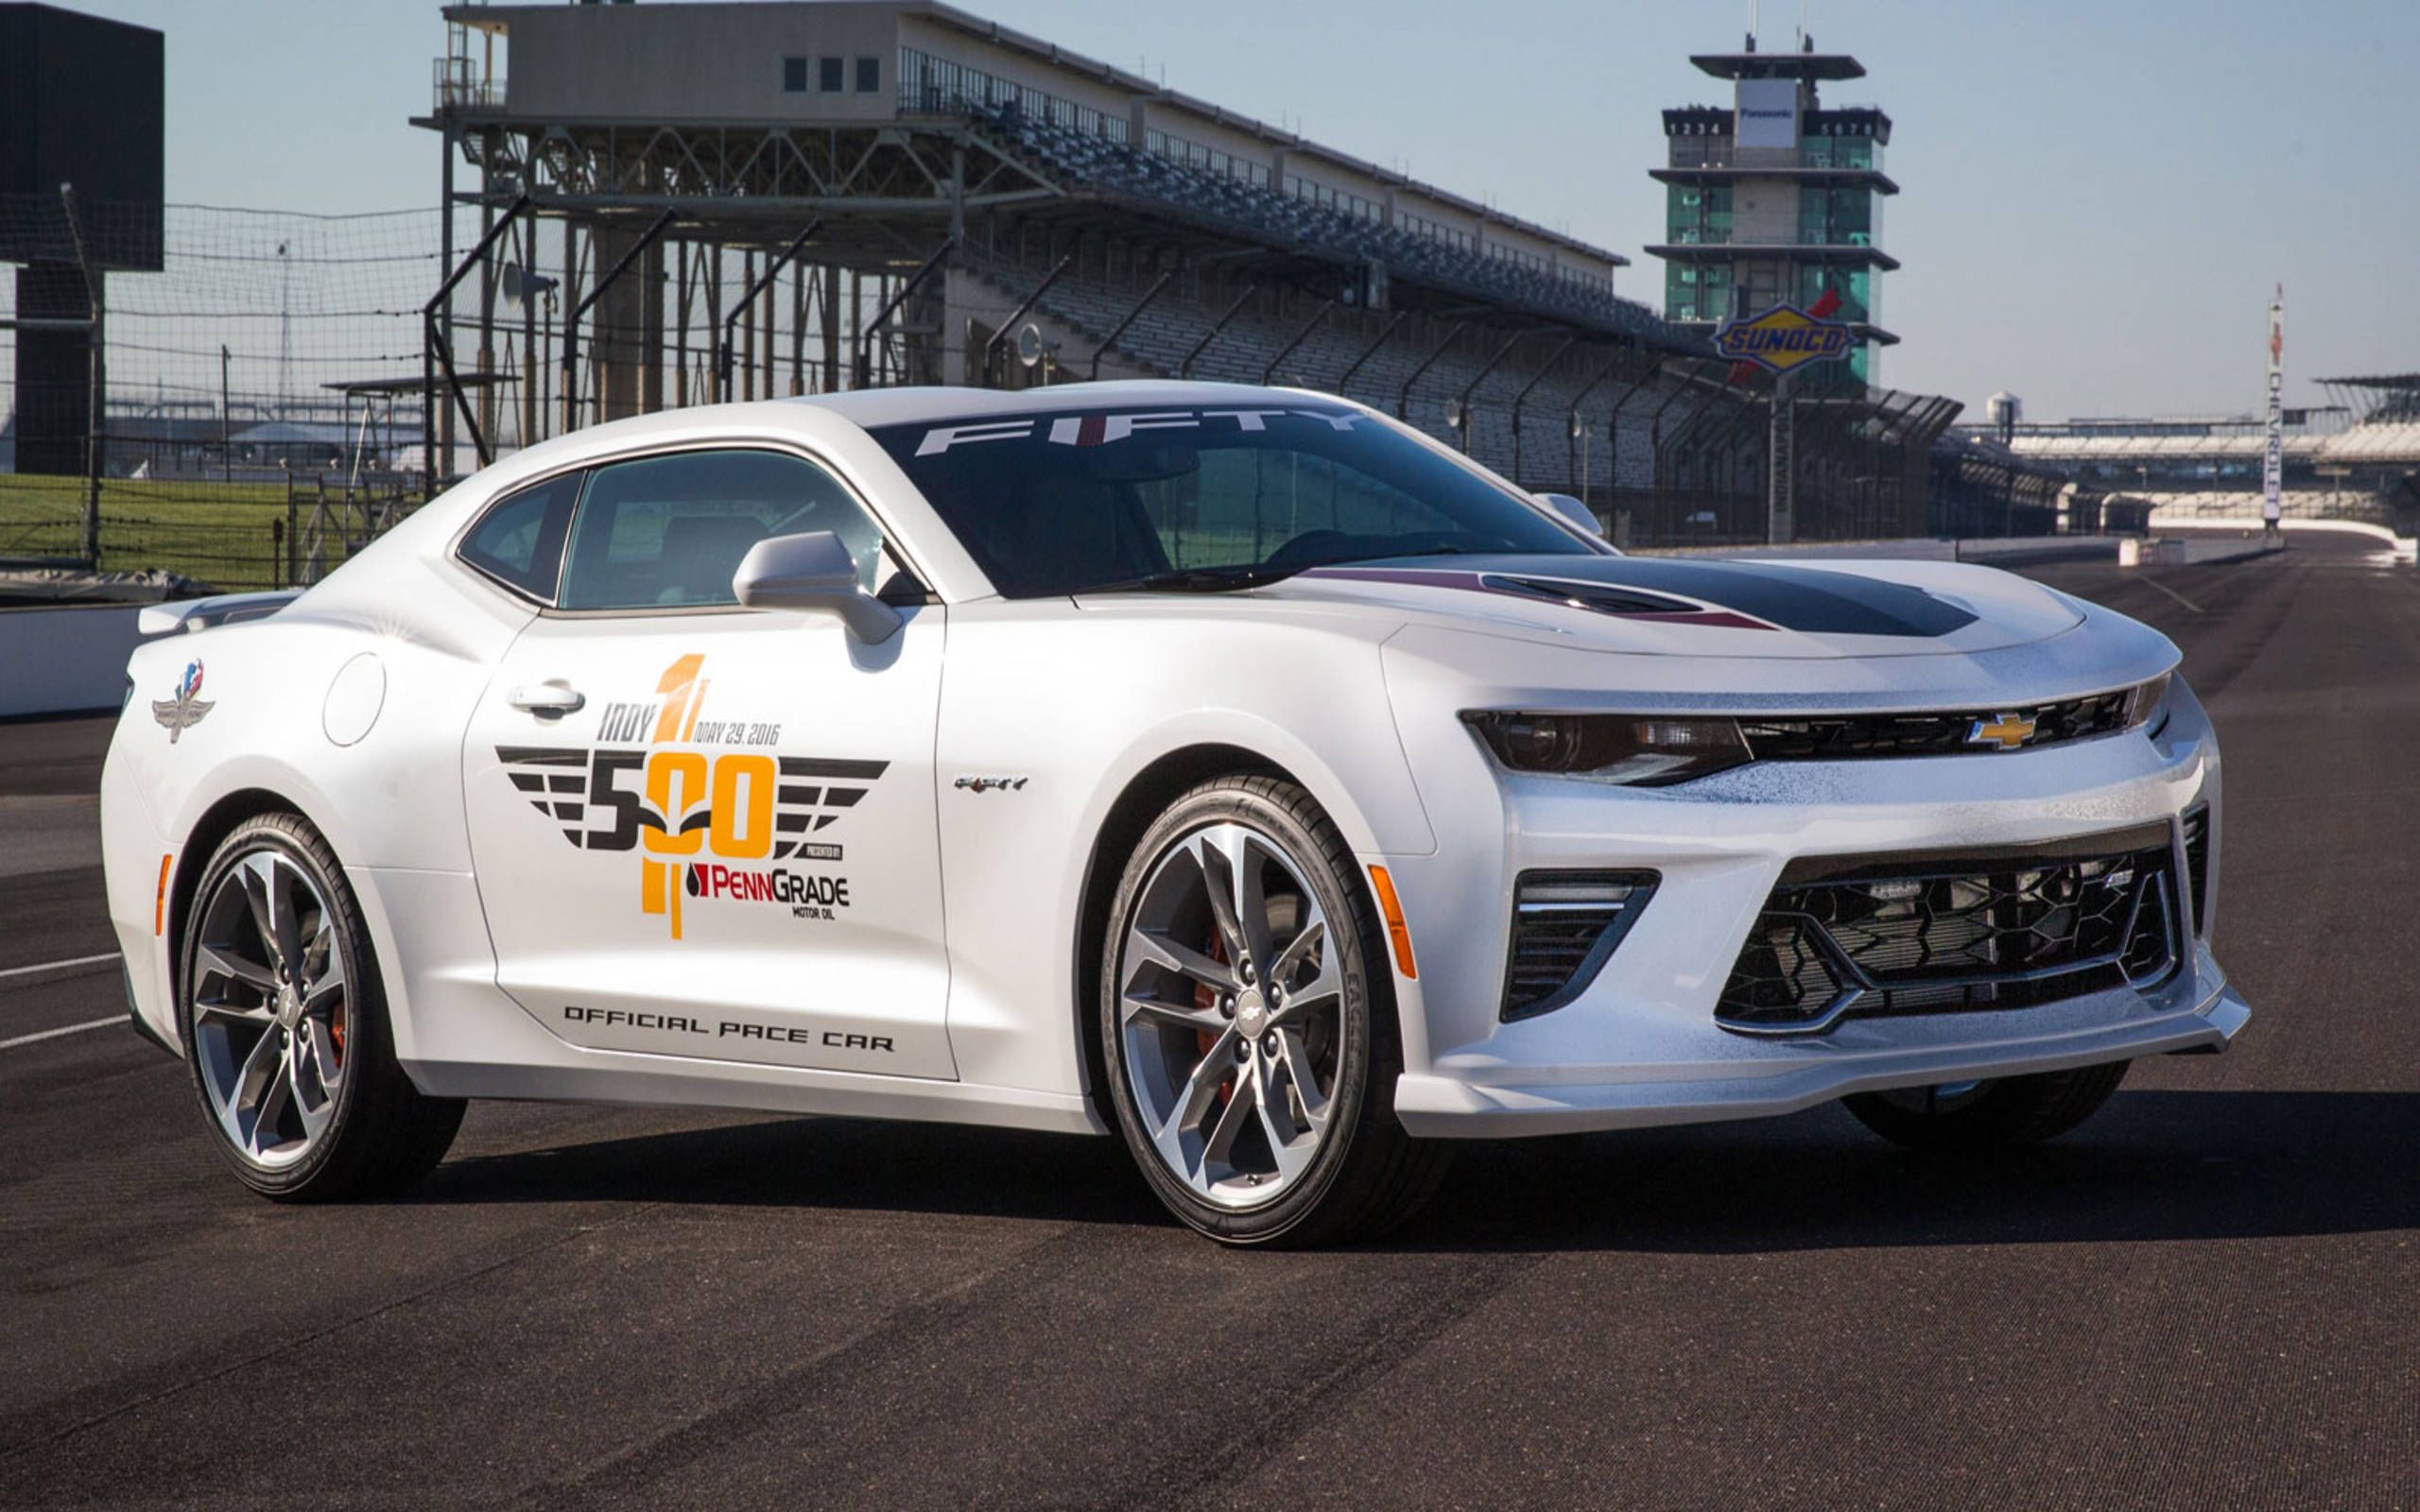 17 Chevrolet Camaro Ss 50th Anniversary Edition To Pace 100th Indy 500